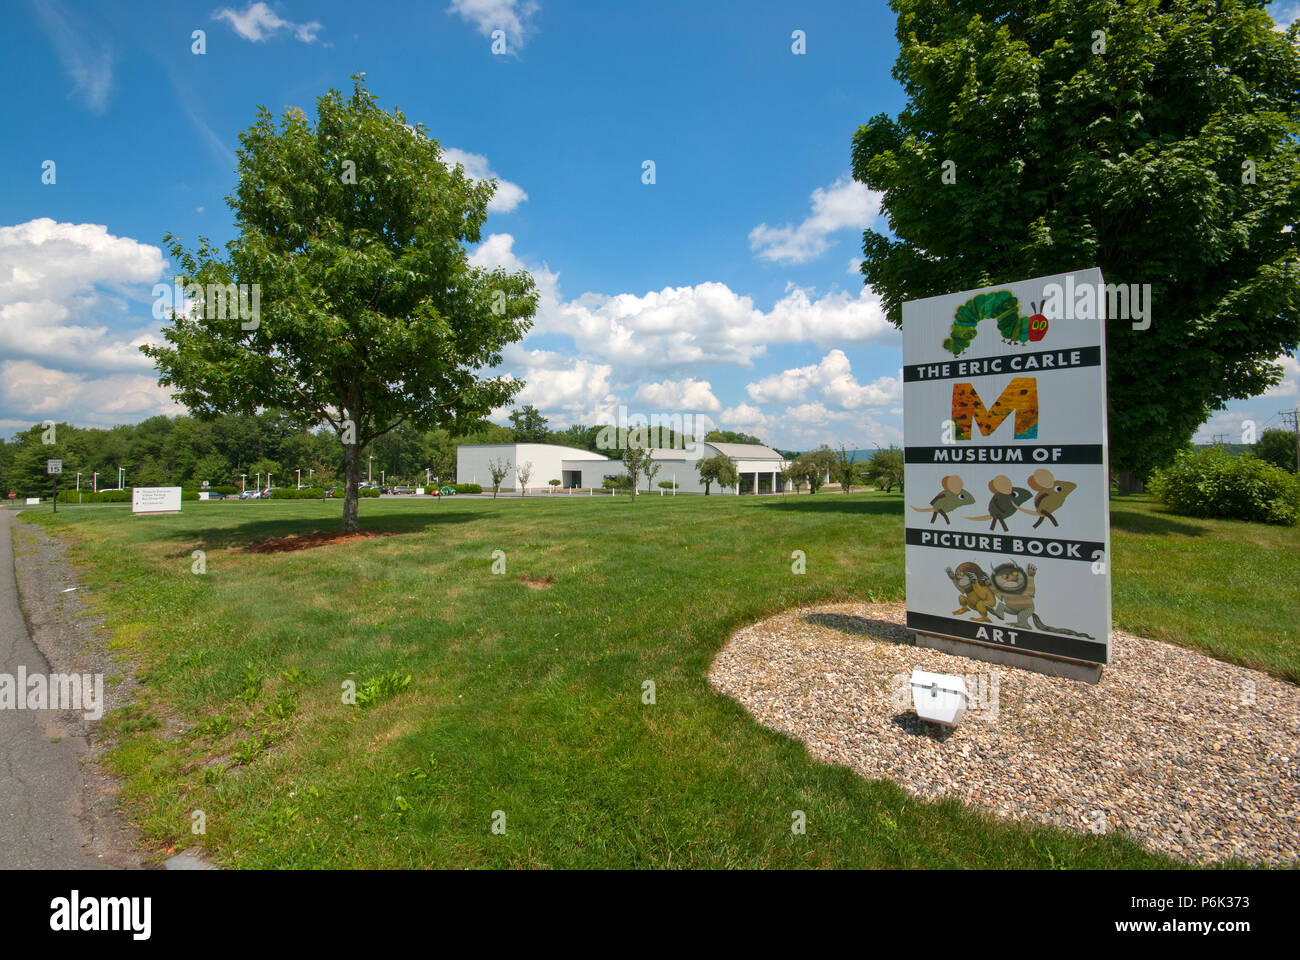 Eric Carle Museum of Picture Book Art, Amherst, Hampshire County, Massachusetts, USA Stock Photo